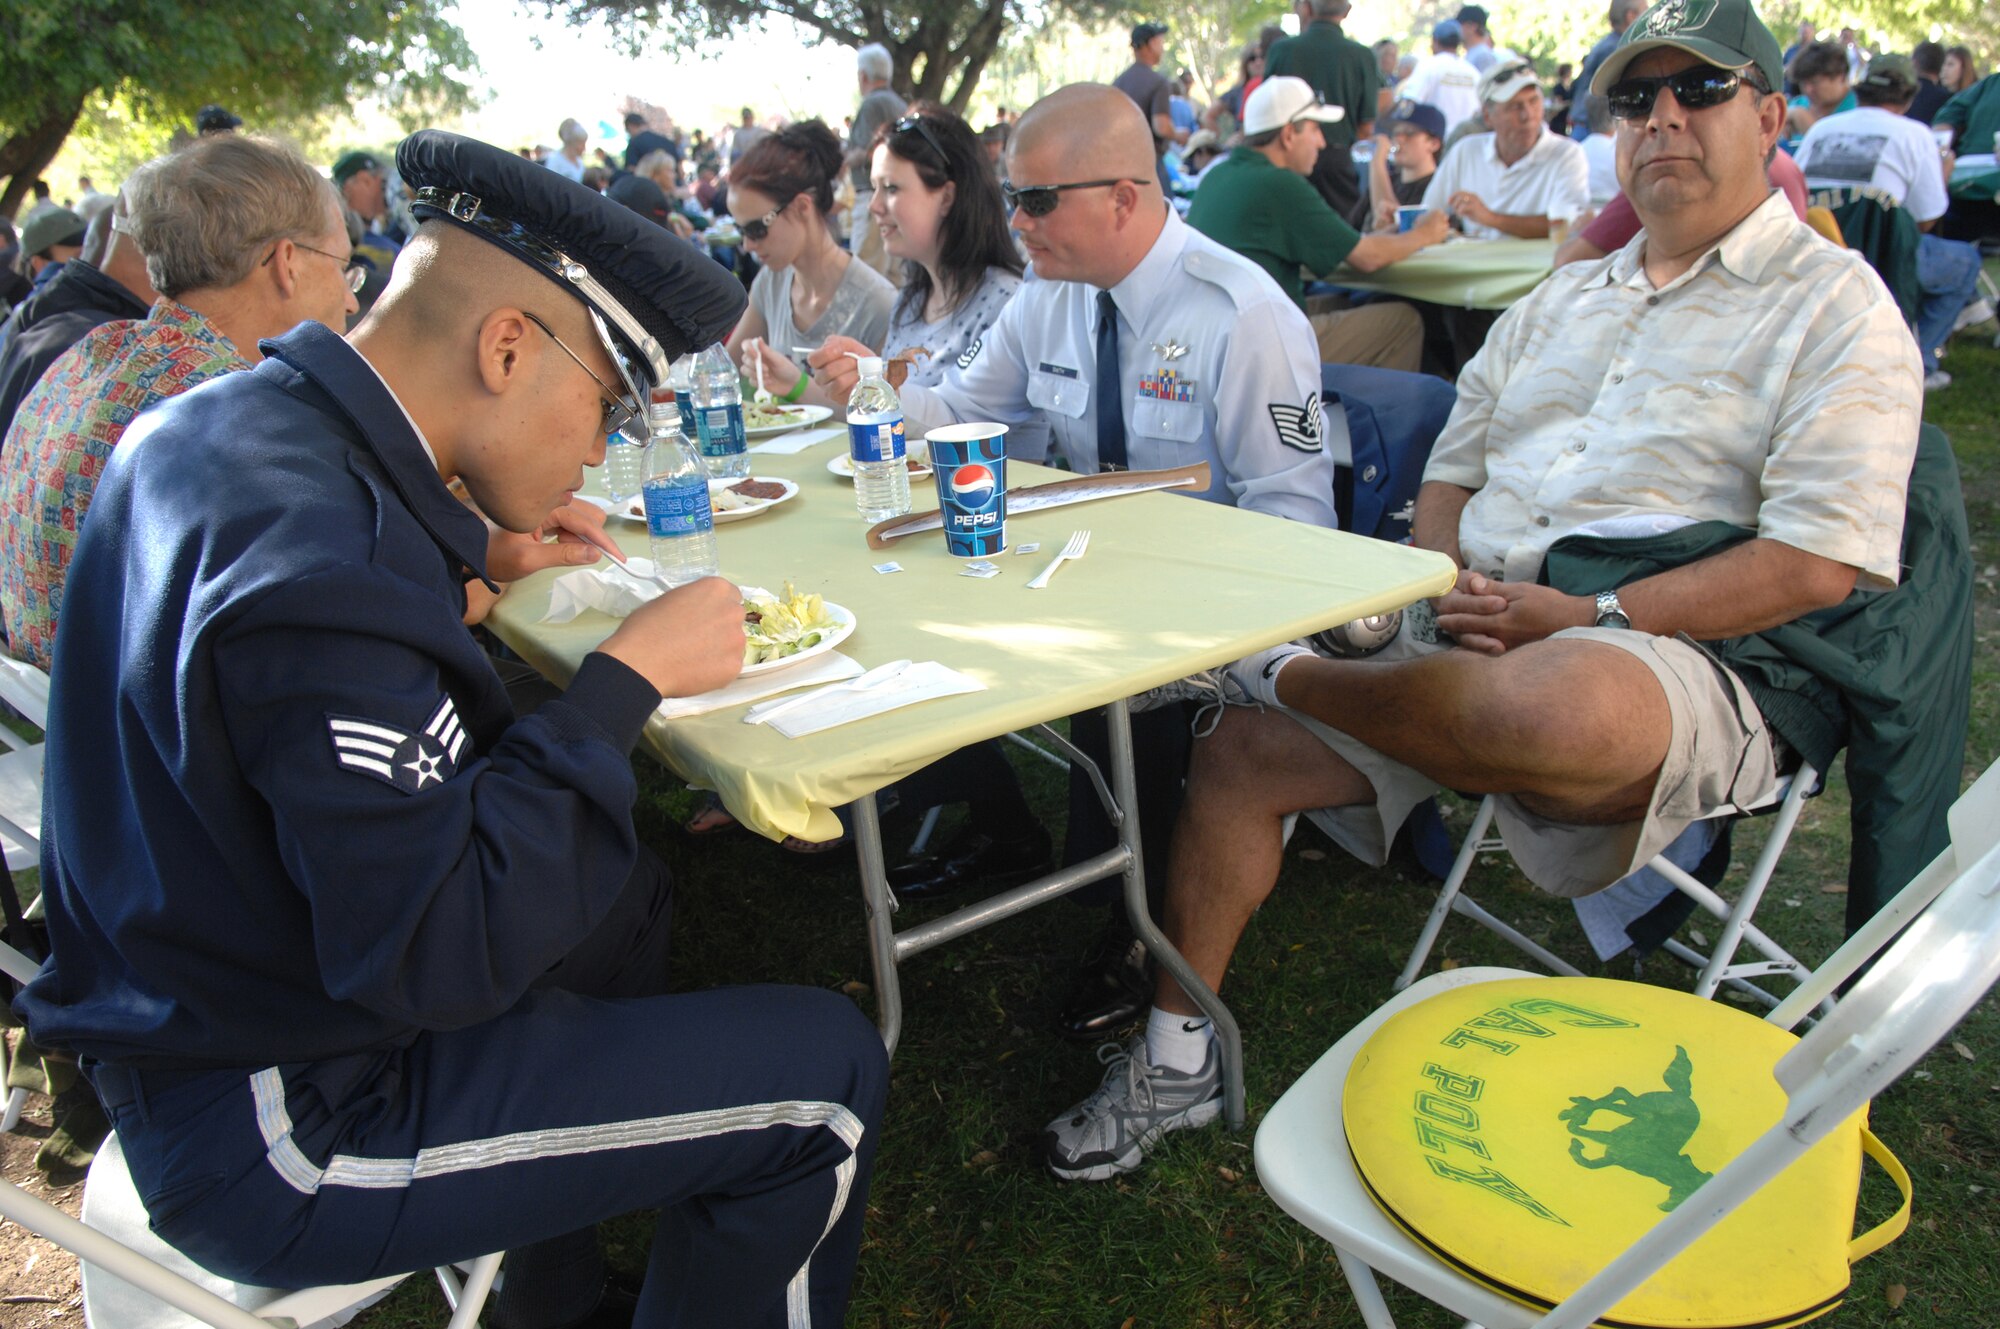 VANDENBERG AIR FORCE BASE, Calif. -- Vandenberg Airmen enjoy Santa Maria style barbecue during the California Polytechnic State University military appreciation night on Sept. 15. The game and barbecue was available to military members. (U.S. Air Force photo/Staff Sgt. Vanessa Valentine)
